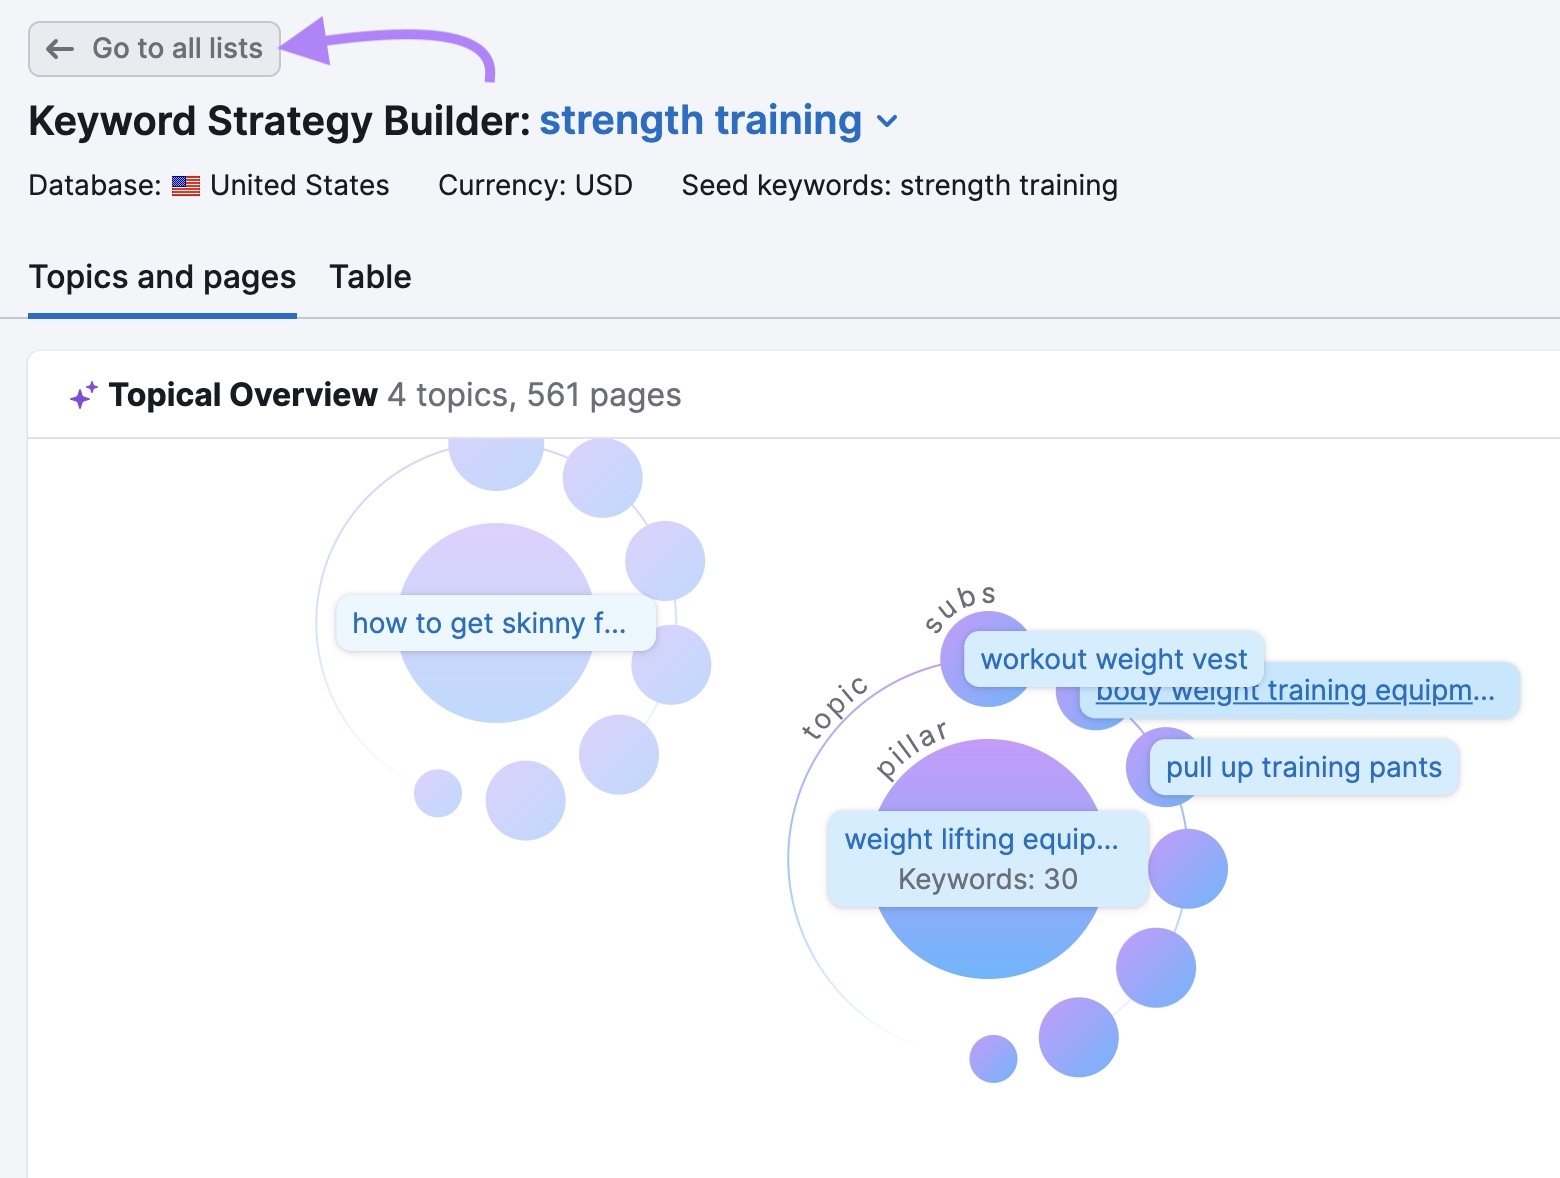 “Go to all lists” button on the top of the Keyword Strategy Builder page clicked.